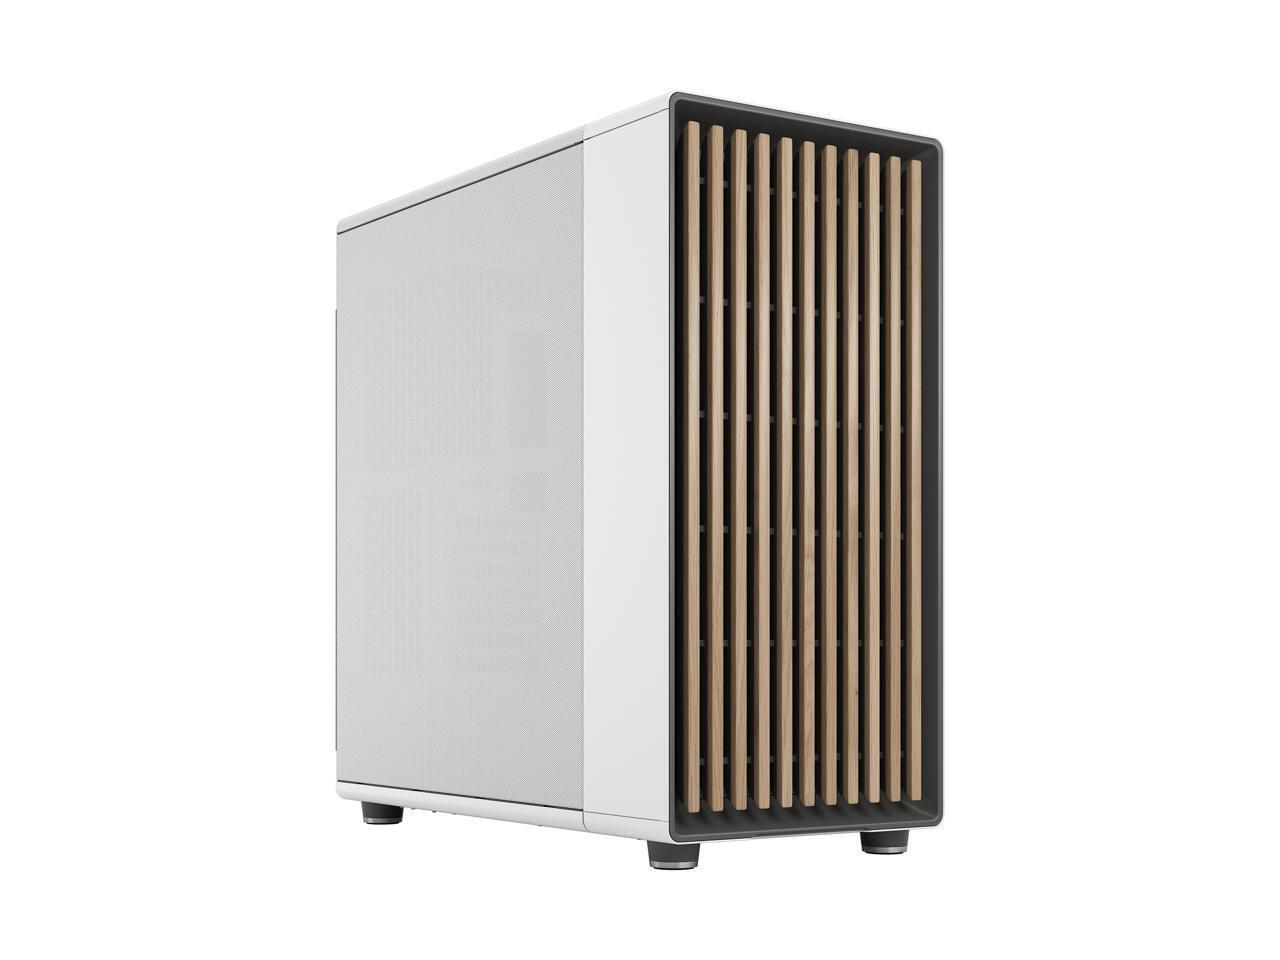 Fractal Design North XL ATX mATX Mid Tower PC Case - Chalk White Chassis with Oa